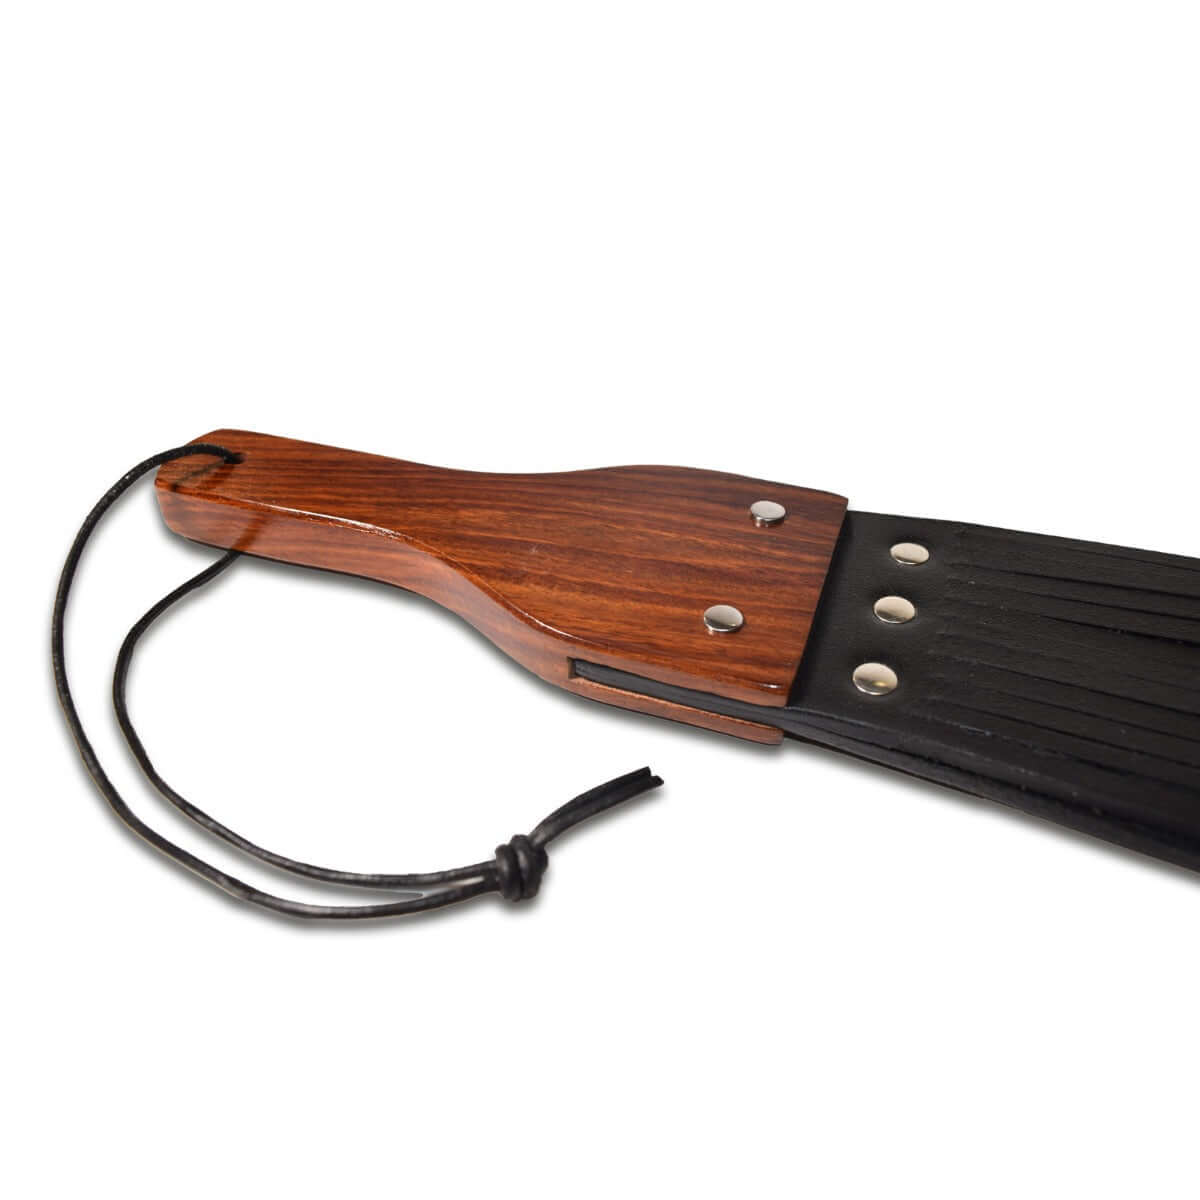 Prowler Red Fringe Paddle Leather and Wood (8246903996655)